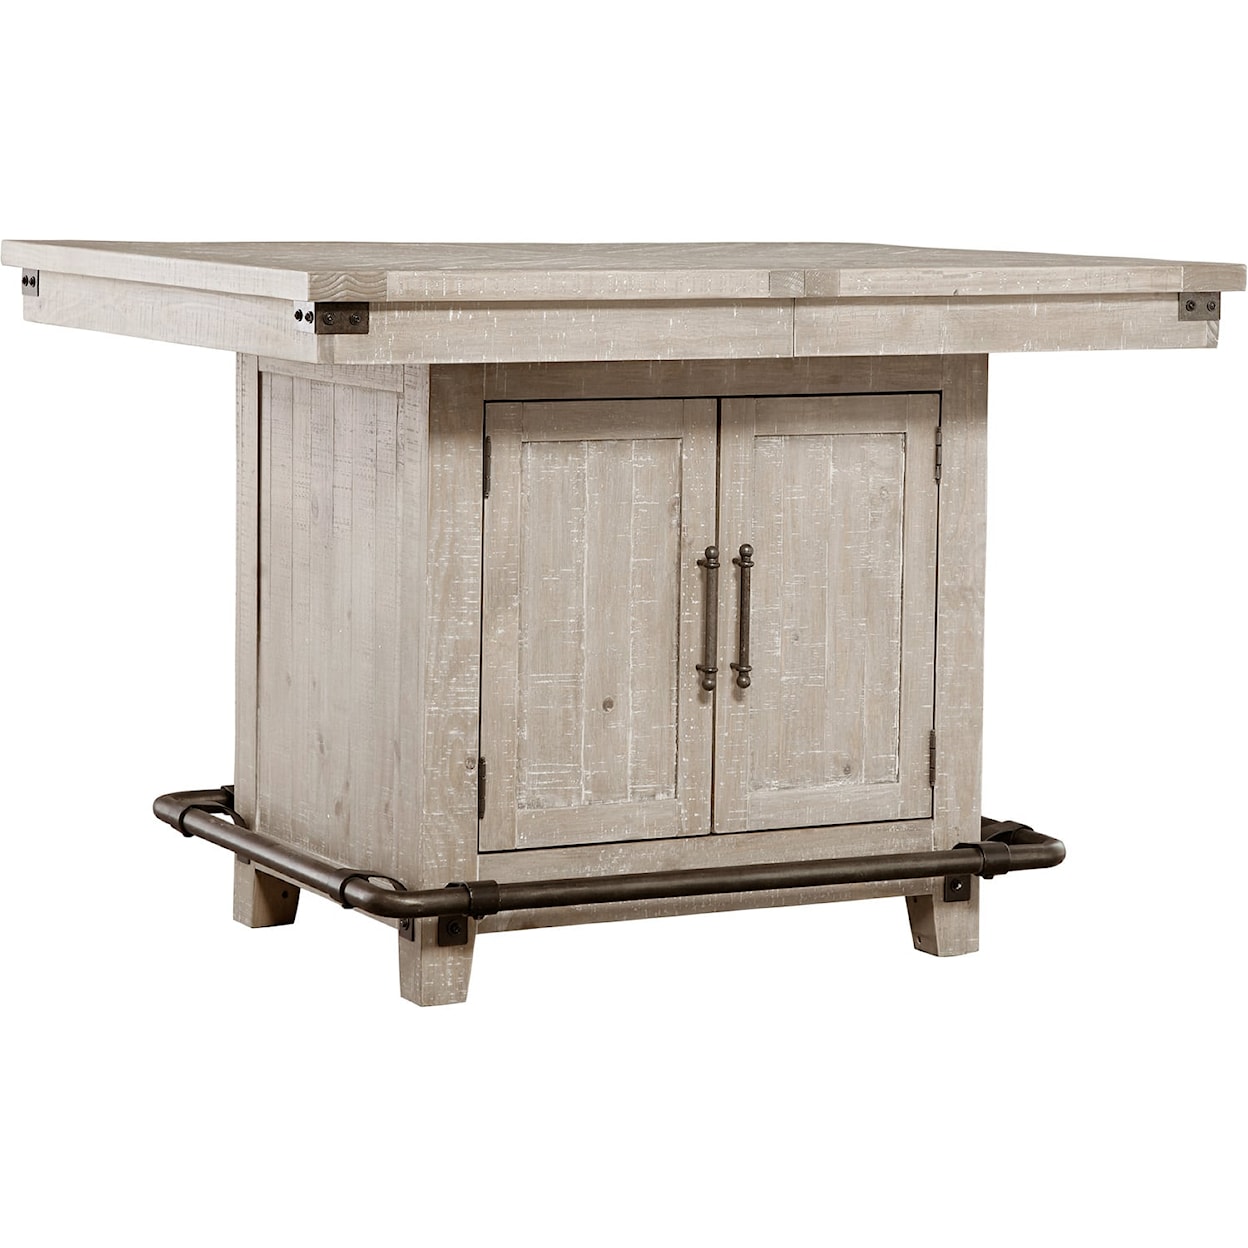 Aspenhome Foundry Extendable Counter-Height Table